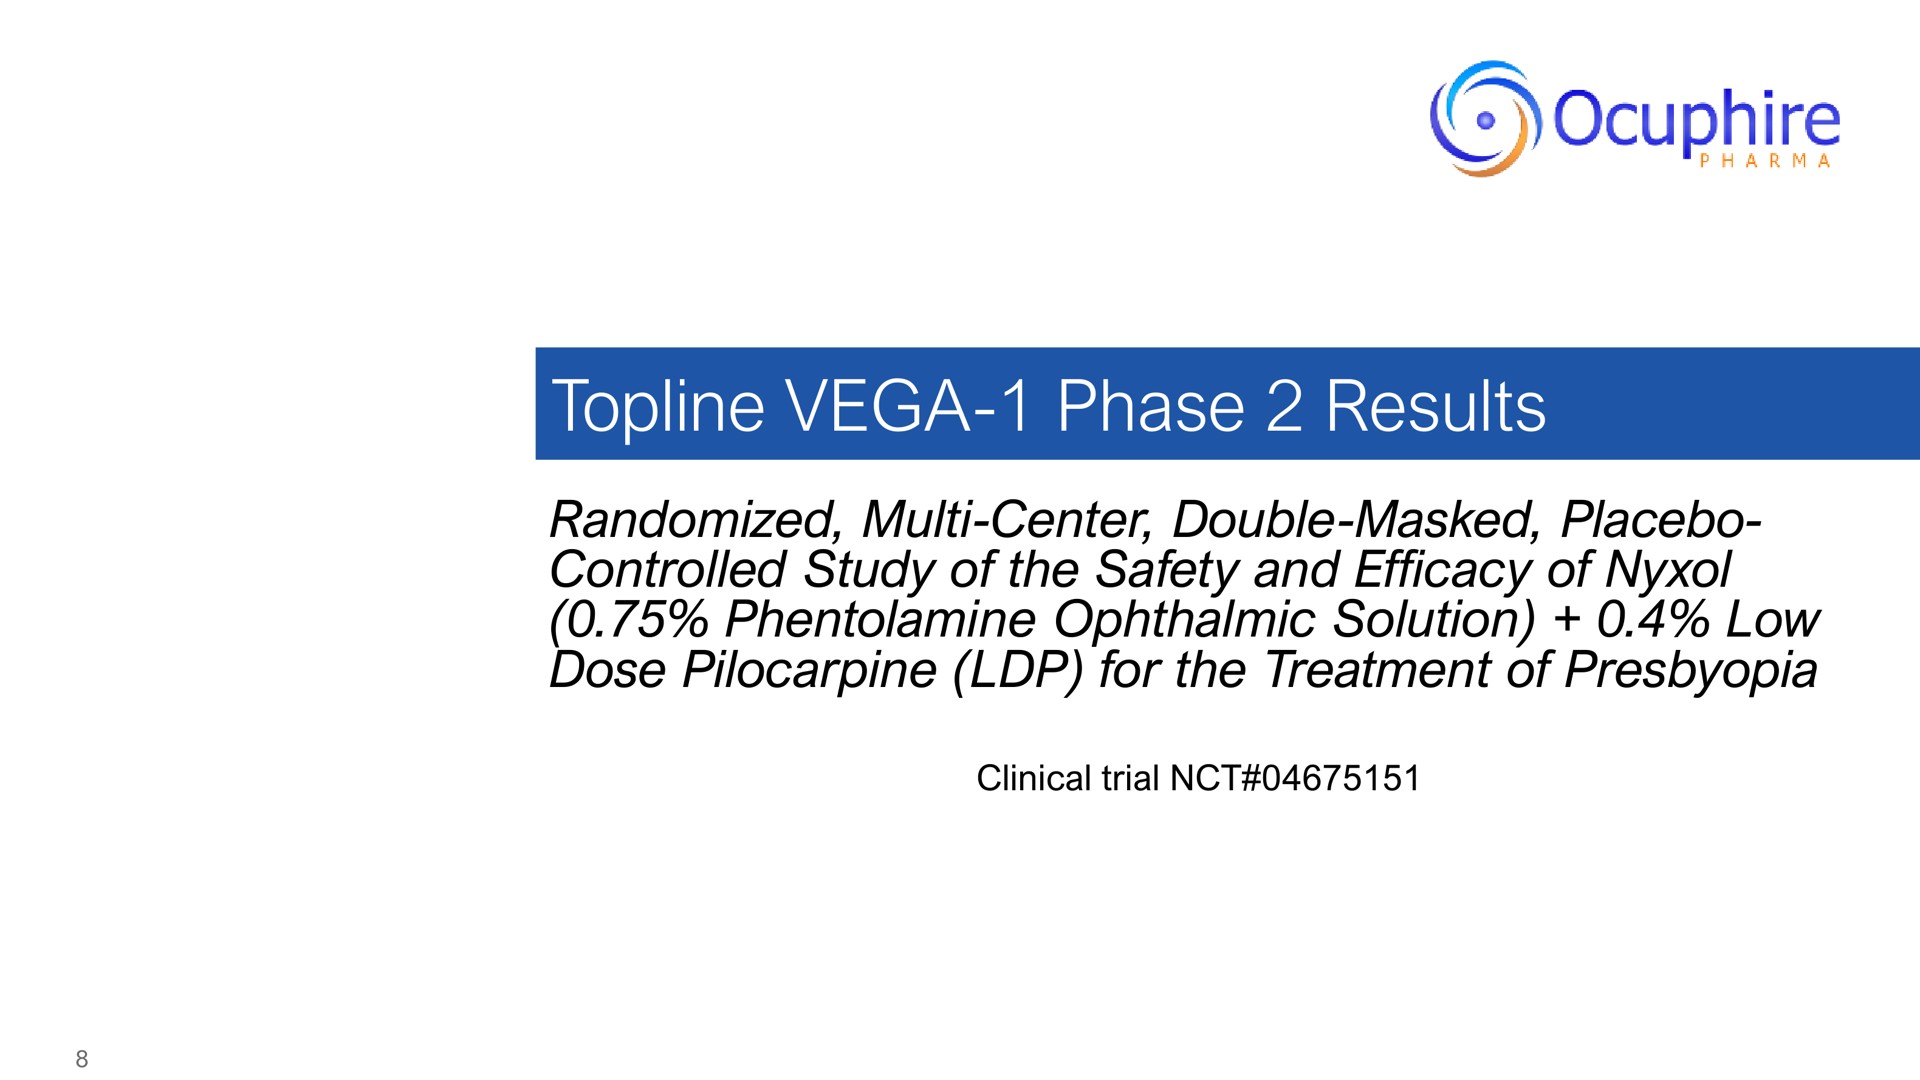 topline phase results randomized center double masked placebo controlled study of the safety and efficacy of ophthalmic solution low dose pilocarpine for the treatment of presbyopia | Ocuphire Pharma